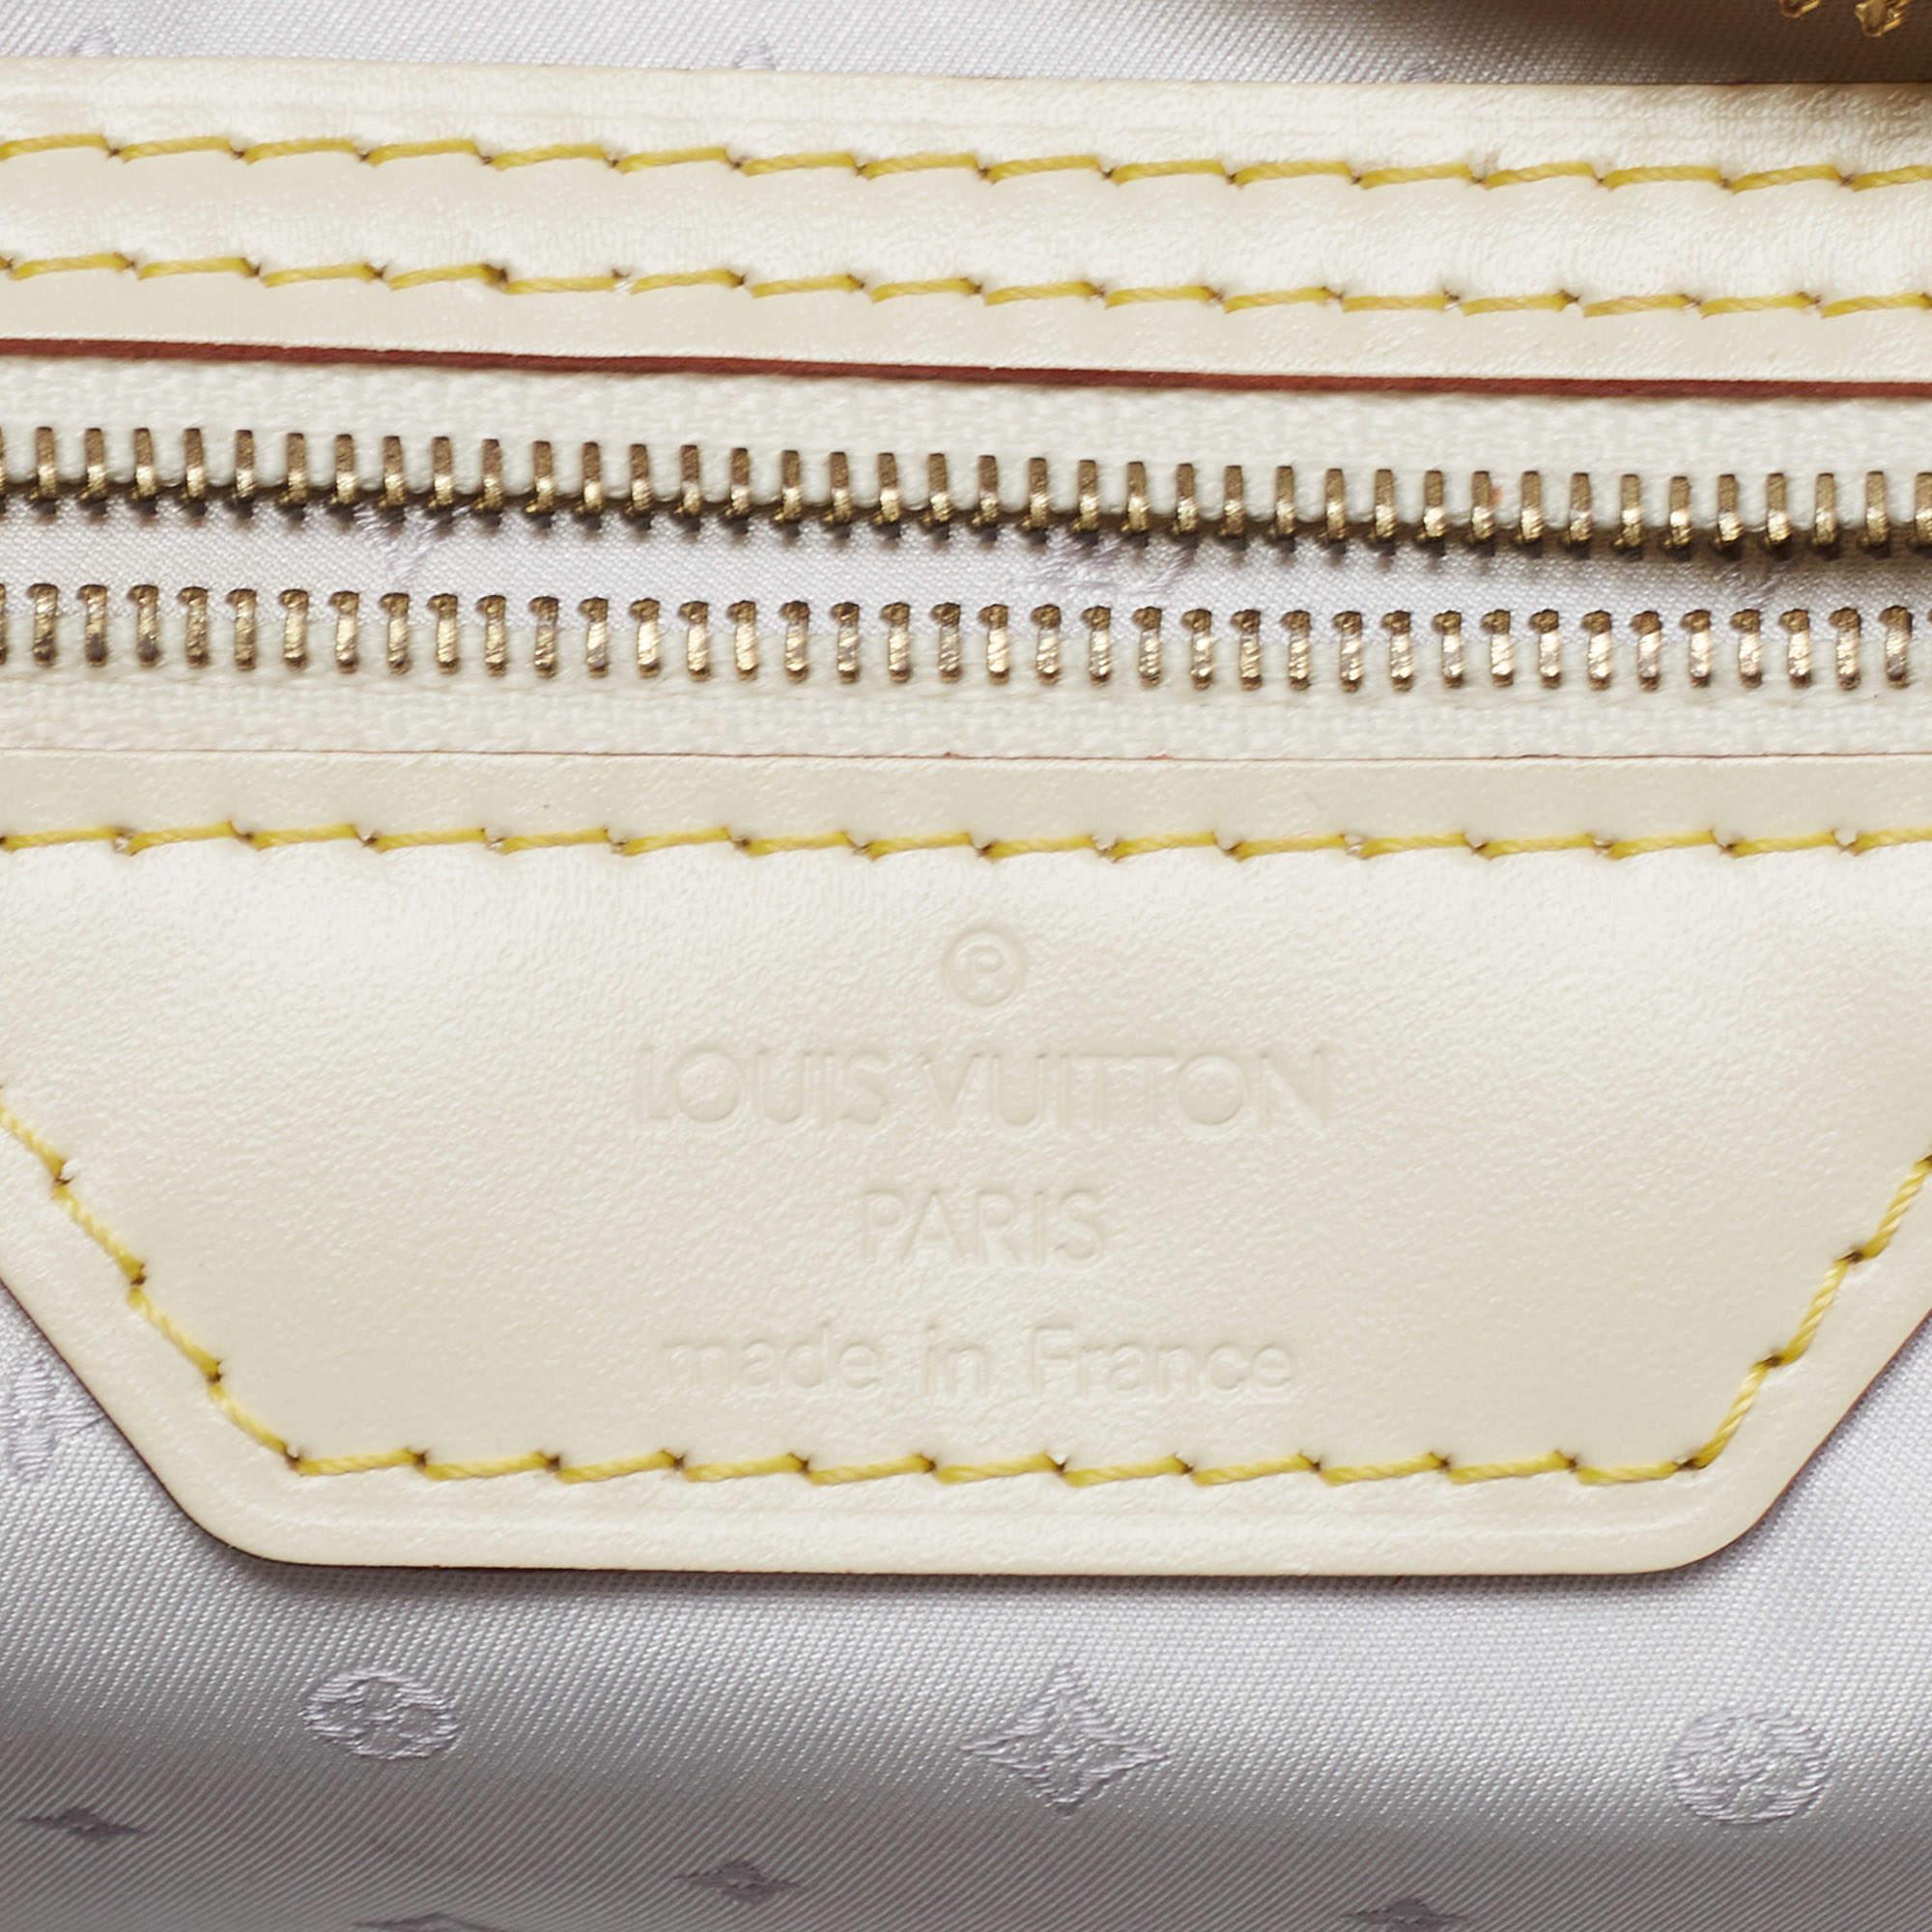 Louis Vuitton Ivory Suhali Leather Limited Edition Le Superbe Bag 10